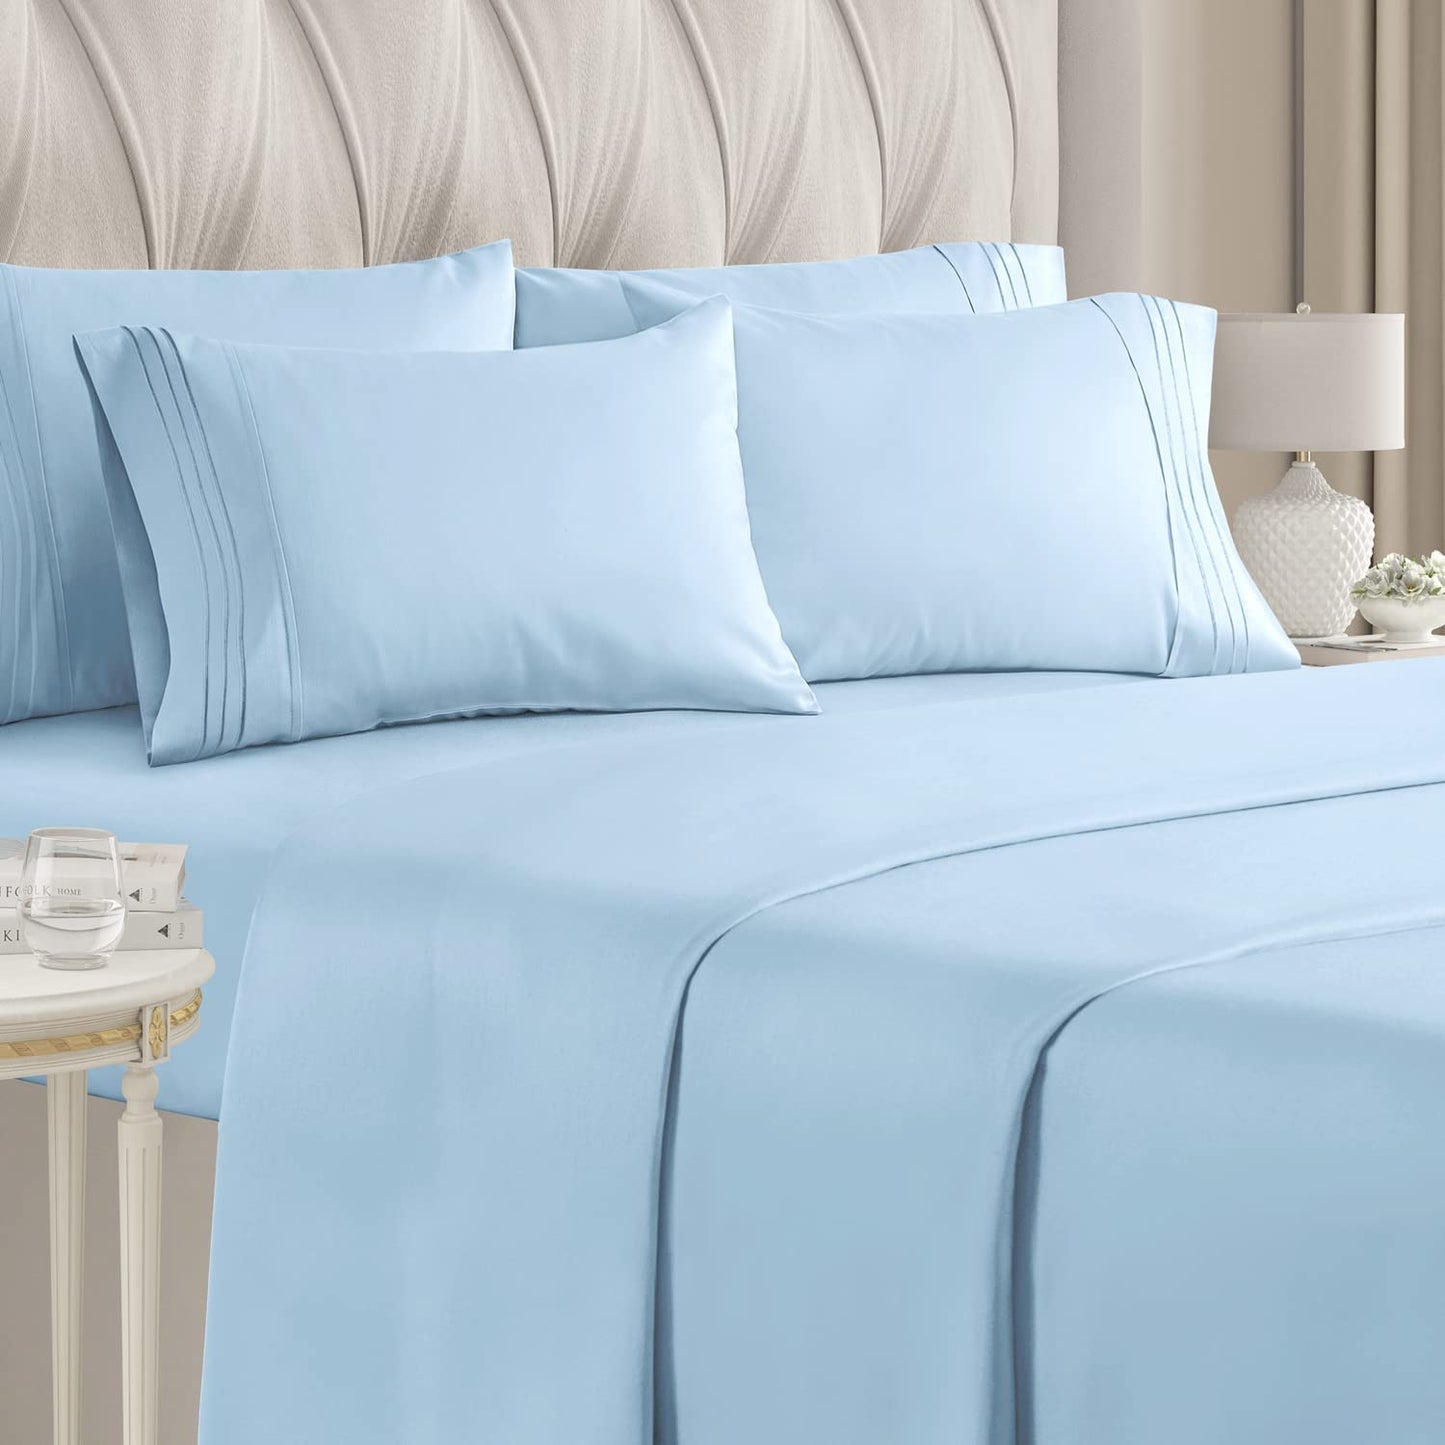 Buy Egyptian Cotton 1500 Thread Count Solid Deep Pocket Sheet Set with everyday discount prices at Egyptianhomelinens.com - Your Online Sheets and Pillowcases Store!